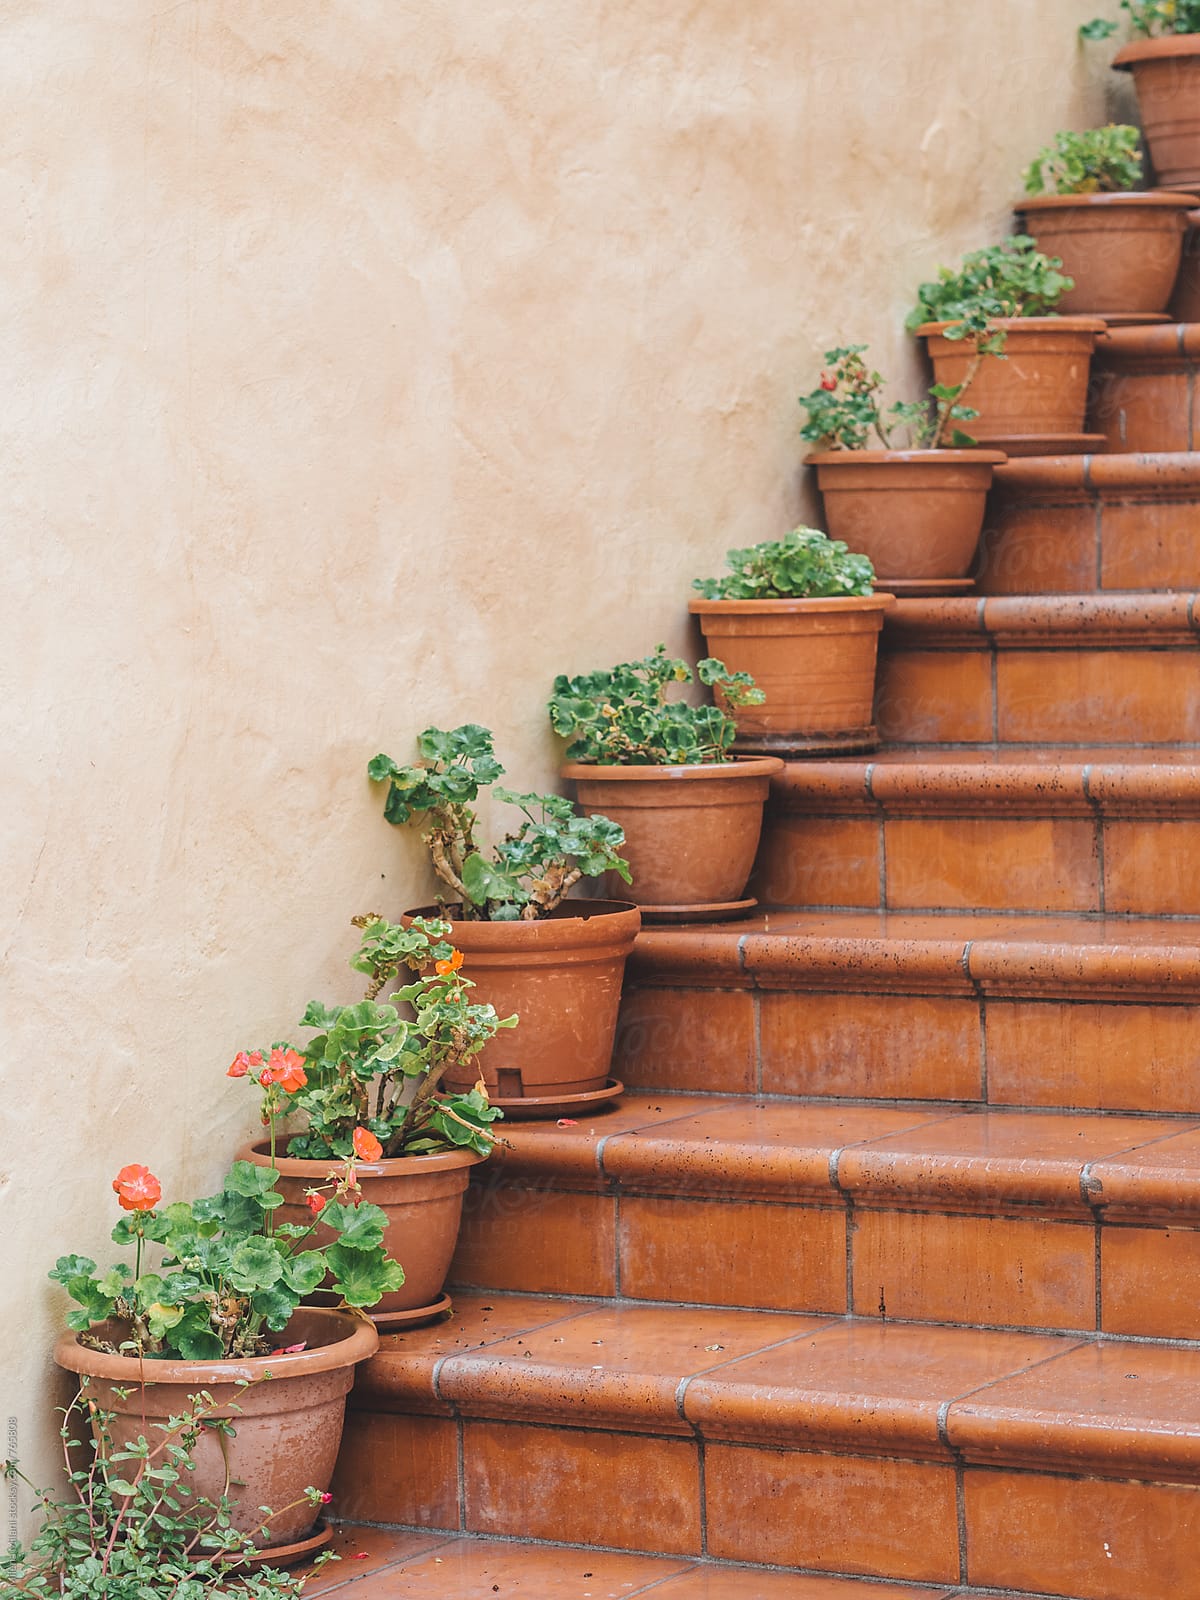 Flower pots on the stairs